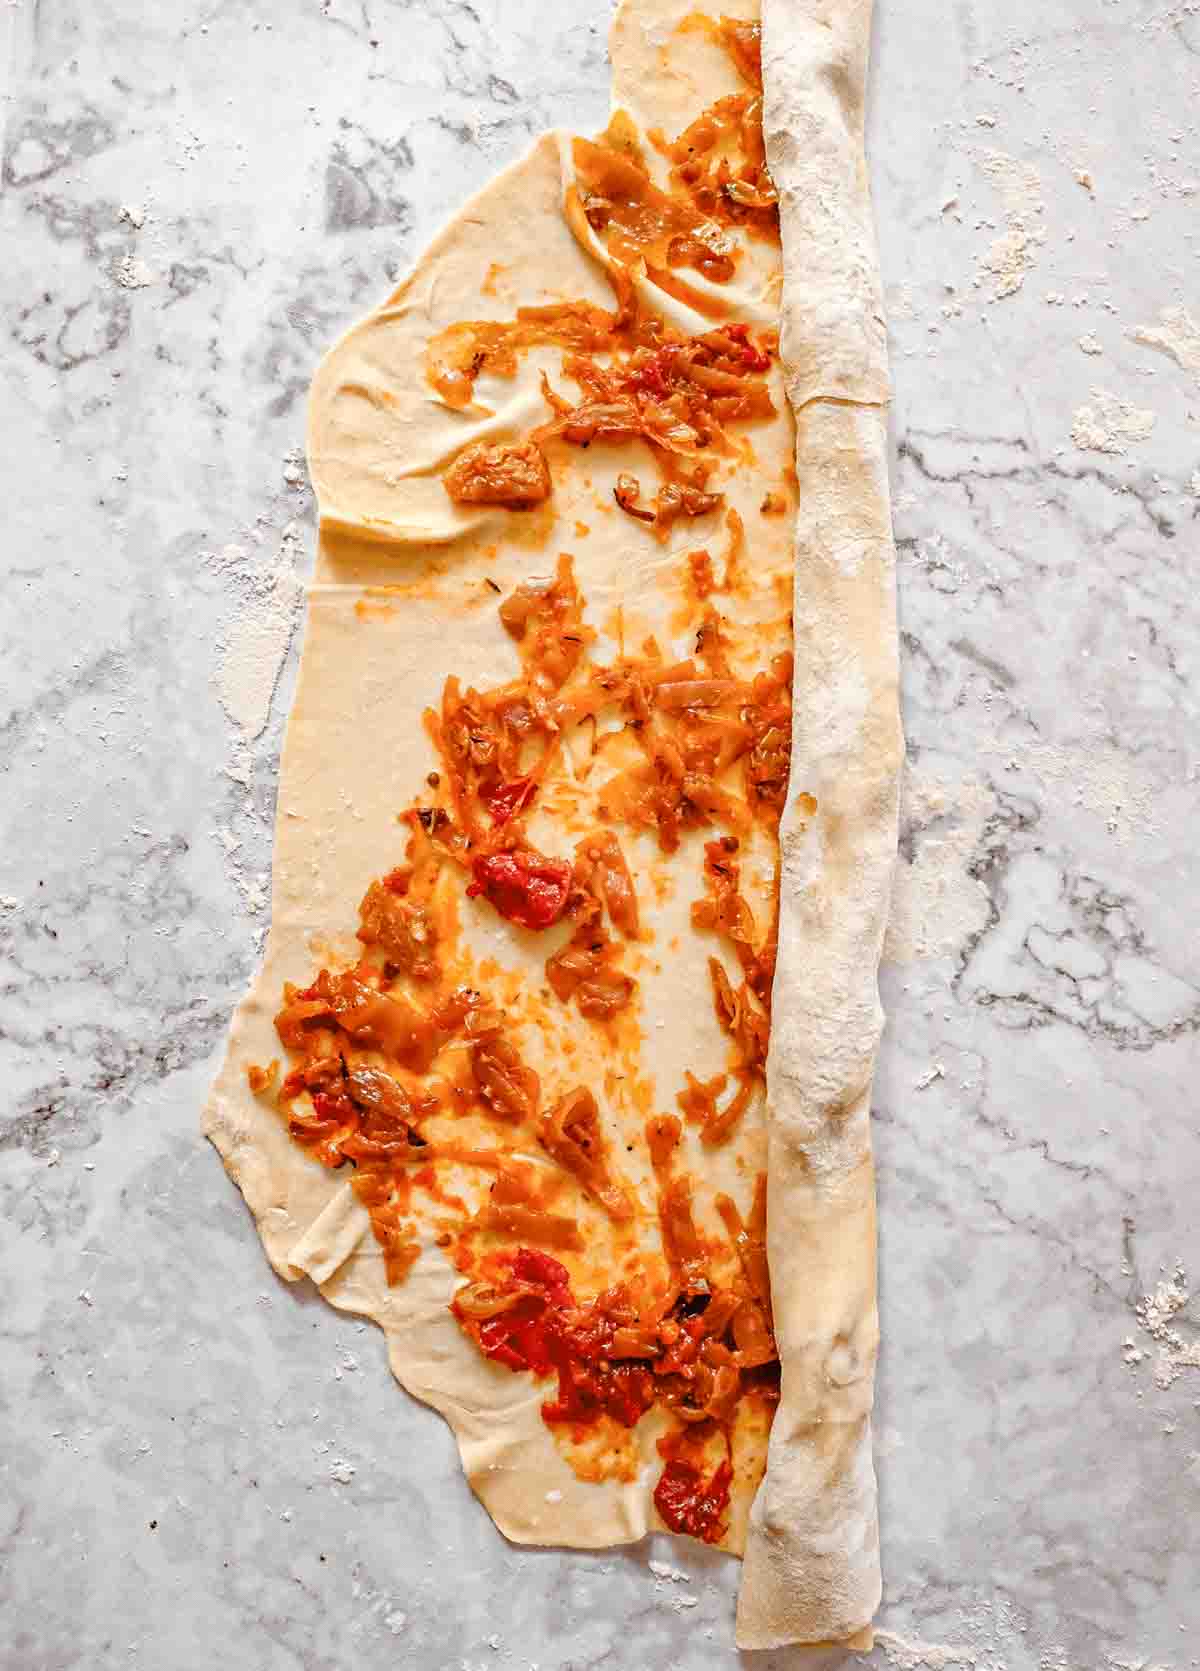 Step two of rolling out and filling phyllo dough: A thinly rolled out sheet of dough that has been covered with orange roasted cabbage and is being rolled into a carpet or cigar like shape.